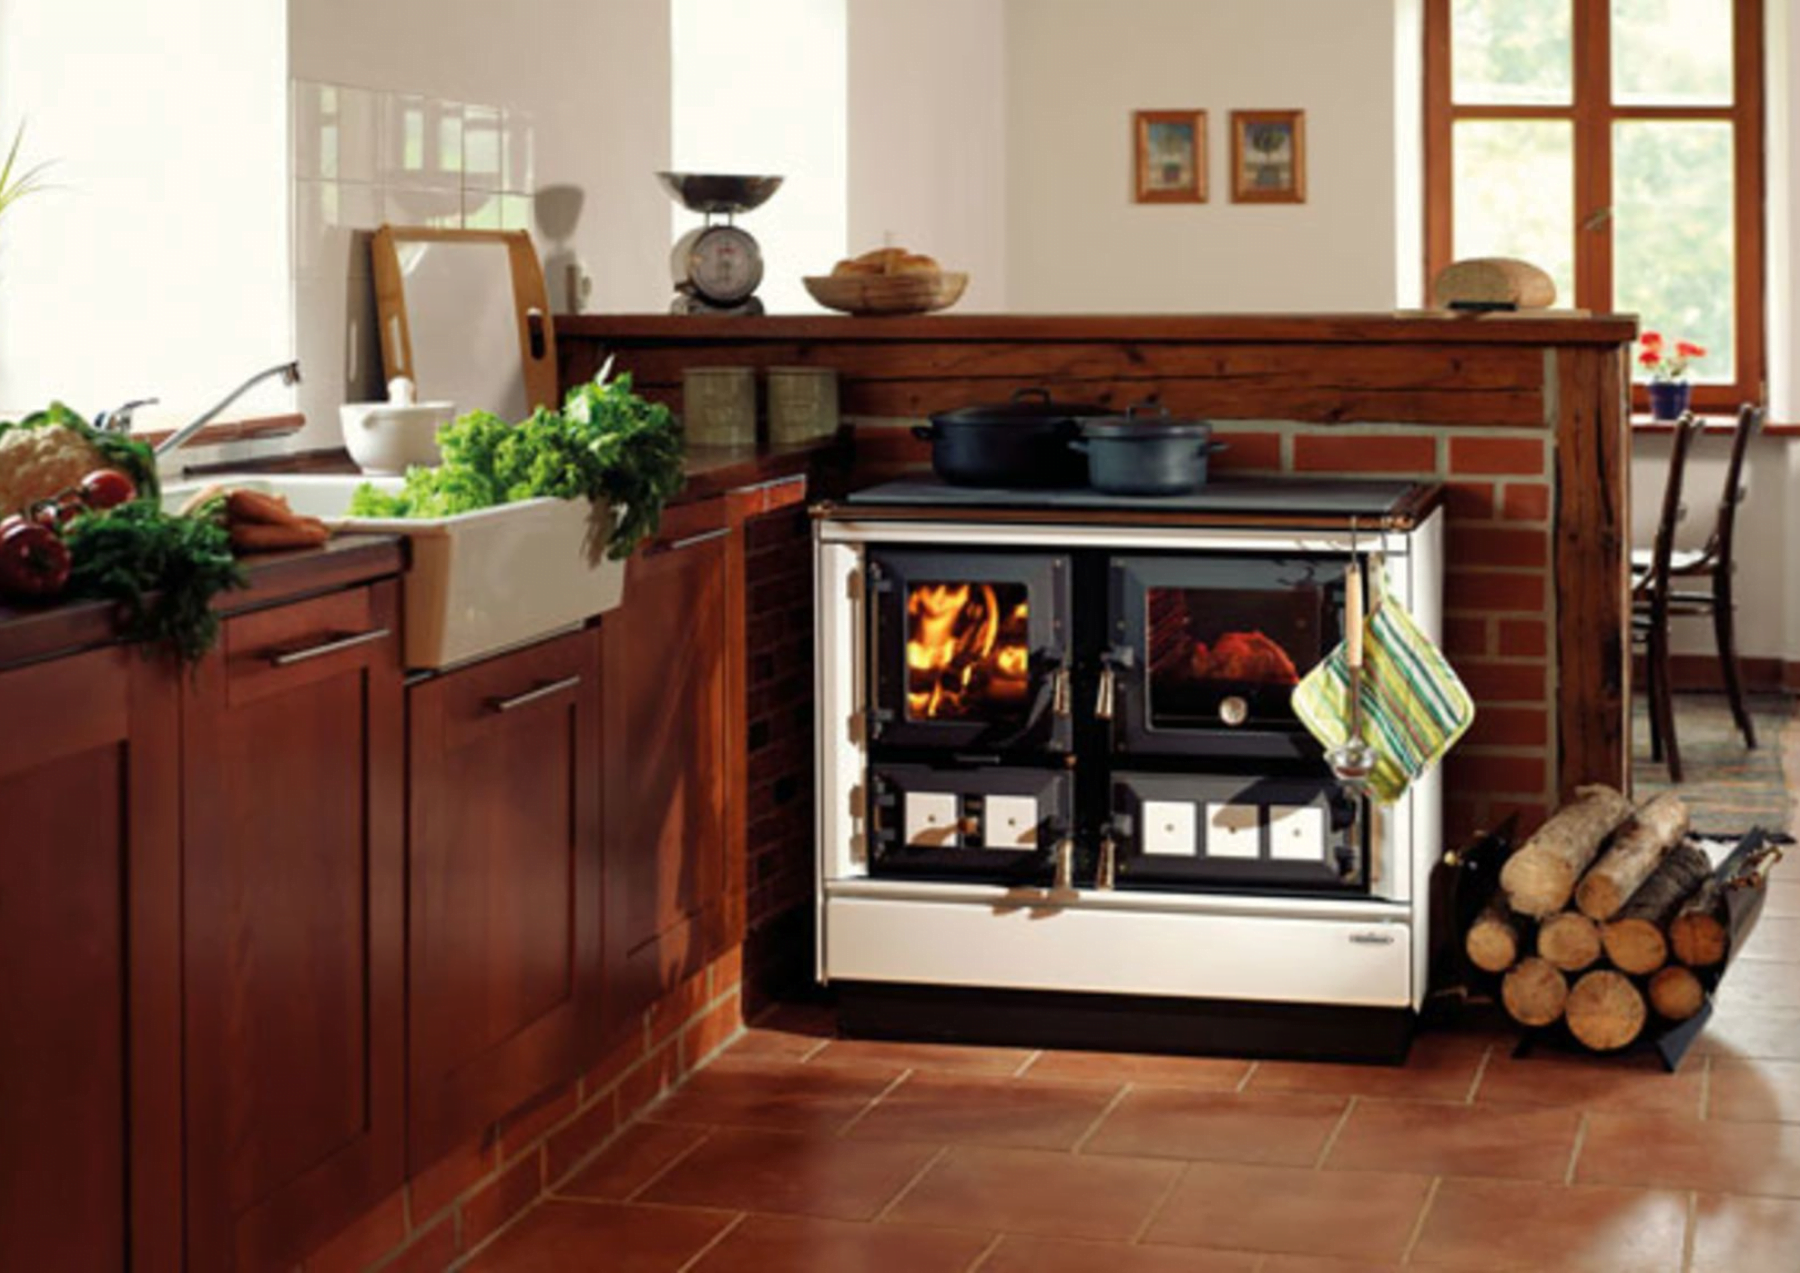 An image of a kitchen stove - Wood burning & Multifuel Stoves